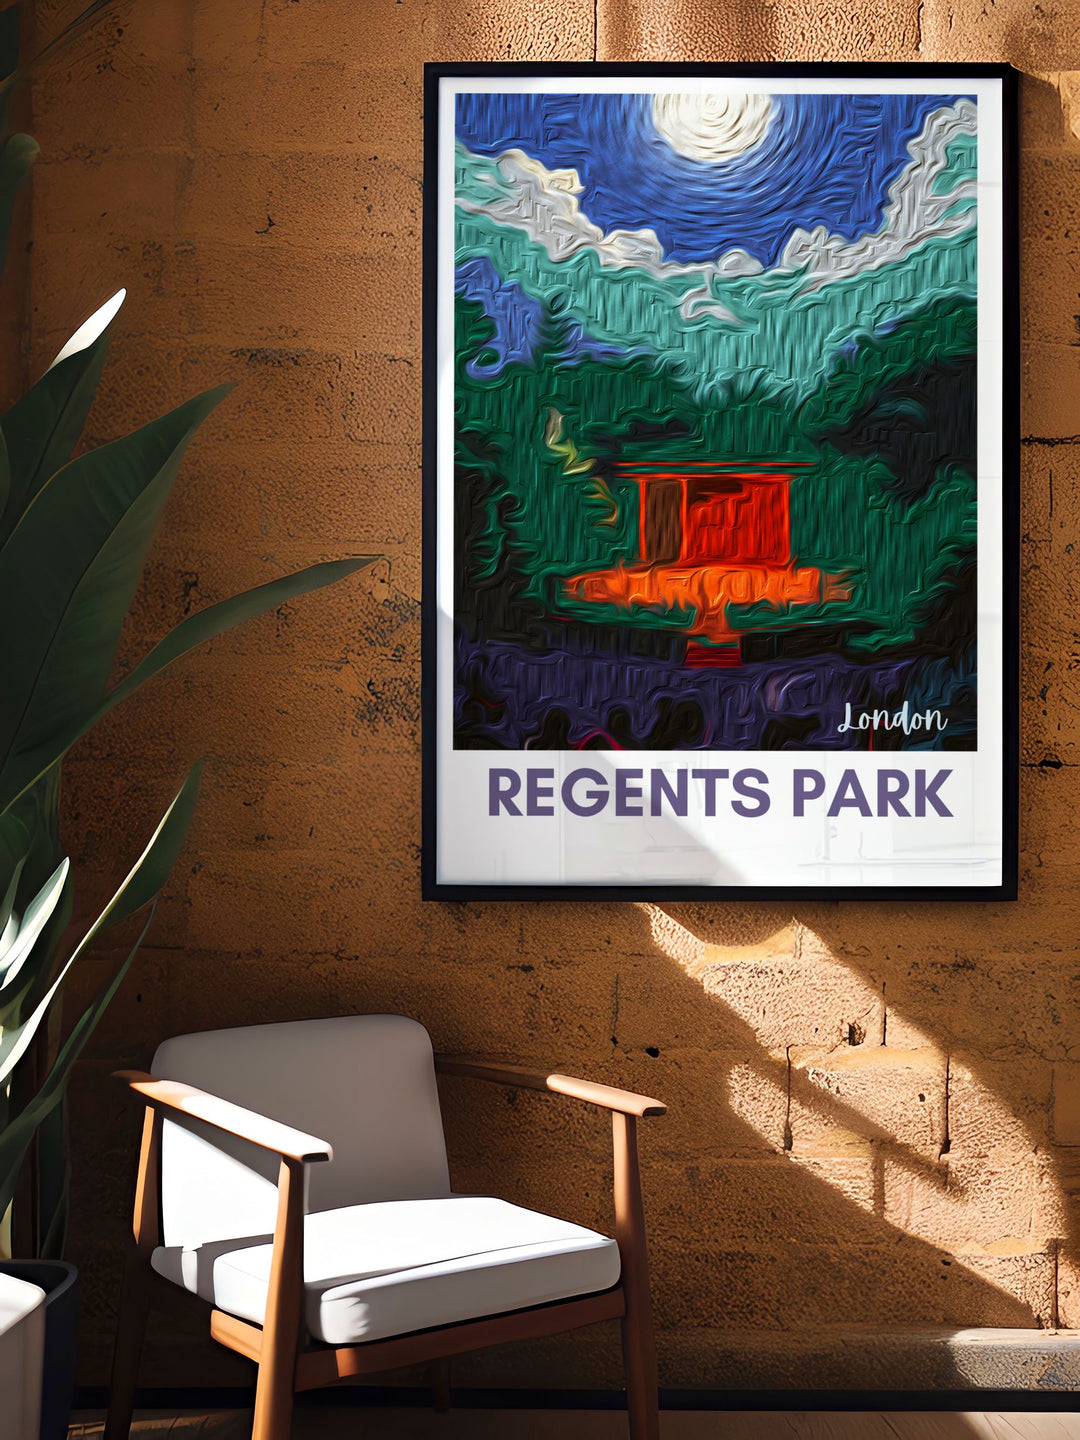 Open Air Theatre Posters capturing the magic of outdoor performances in Regents Park, ideal for theatre lovers and London enthusiasts.